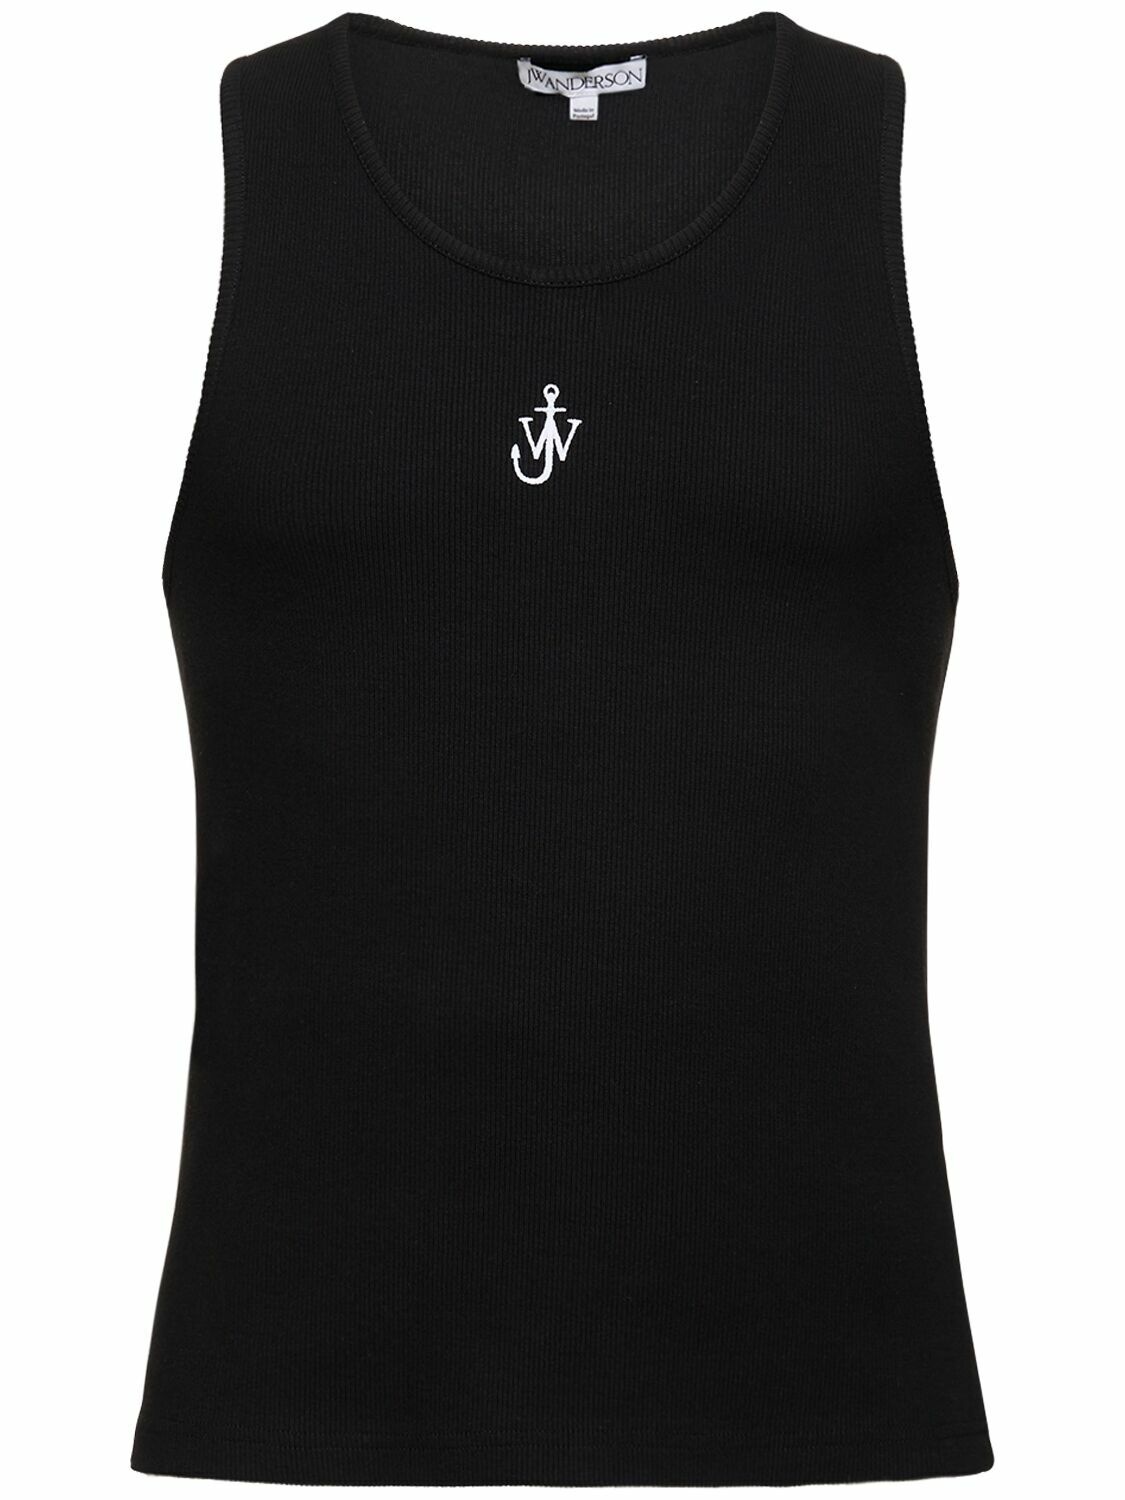 Photo: JW ANDERSON - Logo Embroidery Stretch Cotton Tank Top